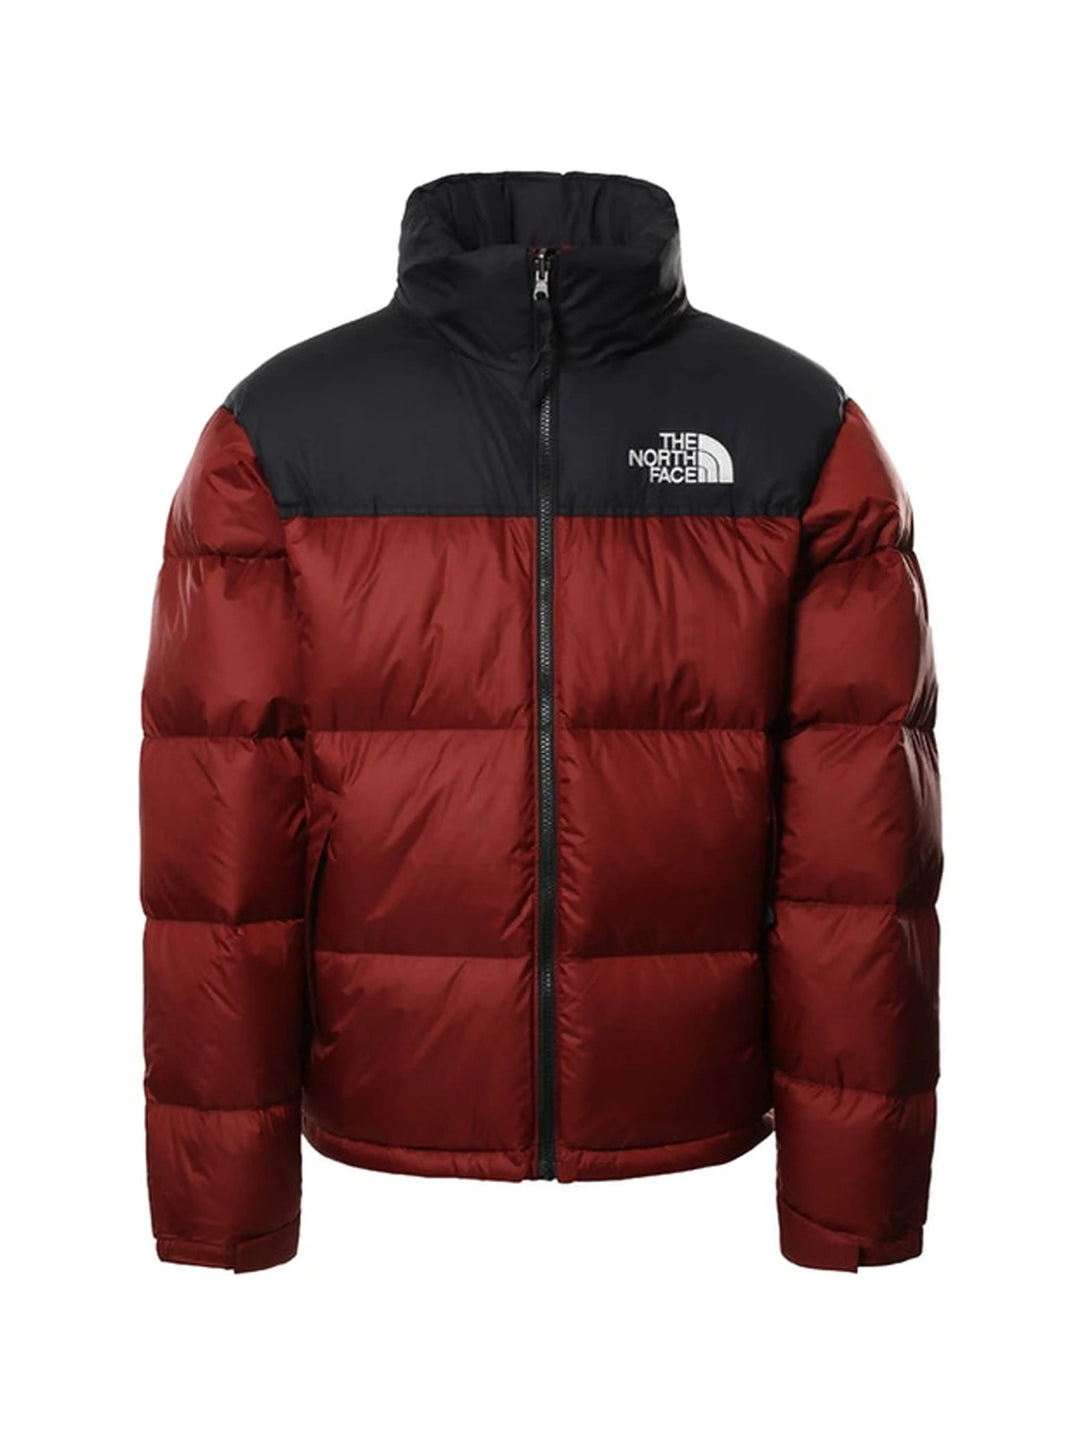 The North Face 1996 Retro Nuptse Packable Jacket TNF Brick House Red Prior